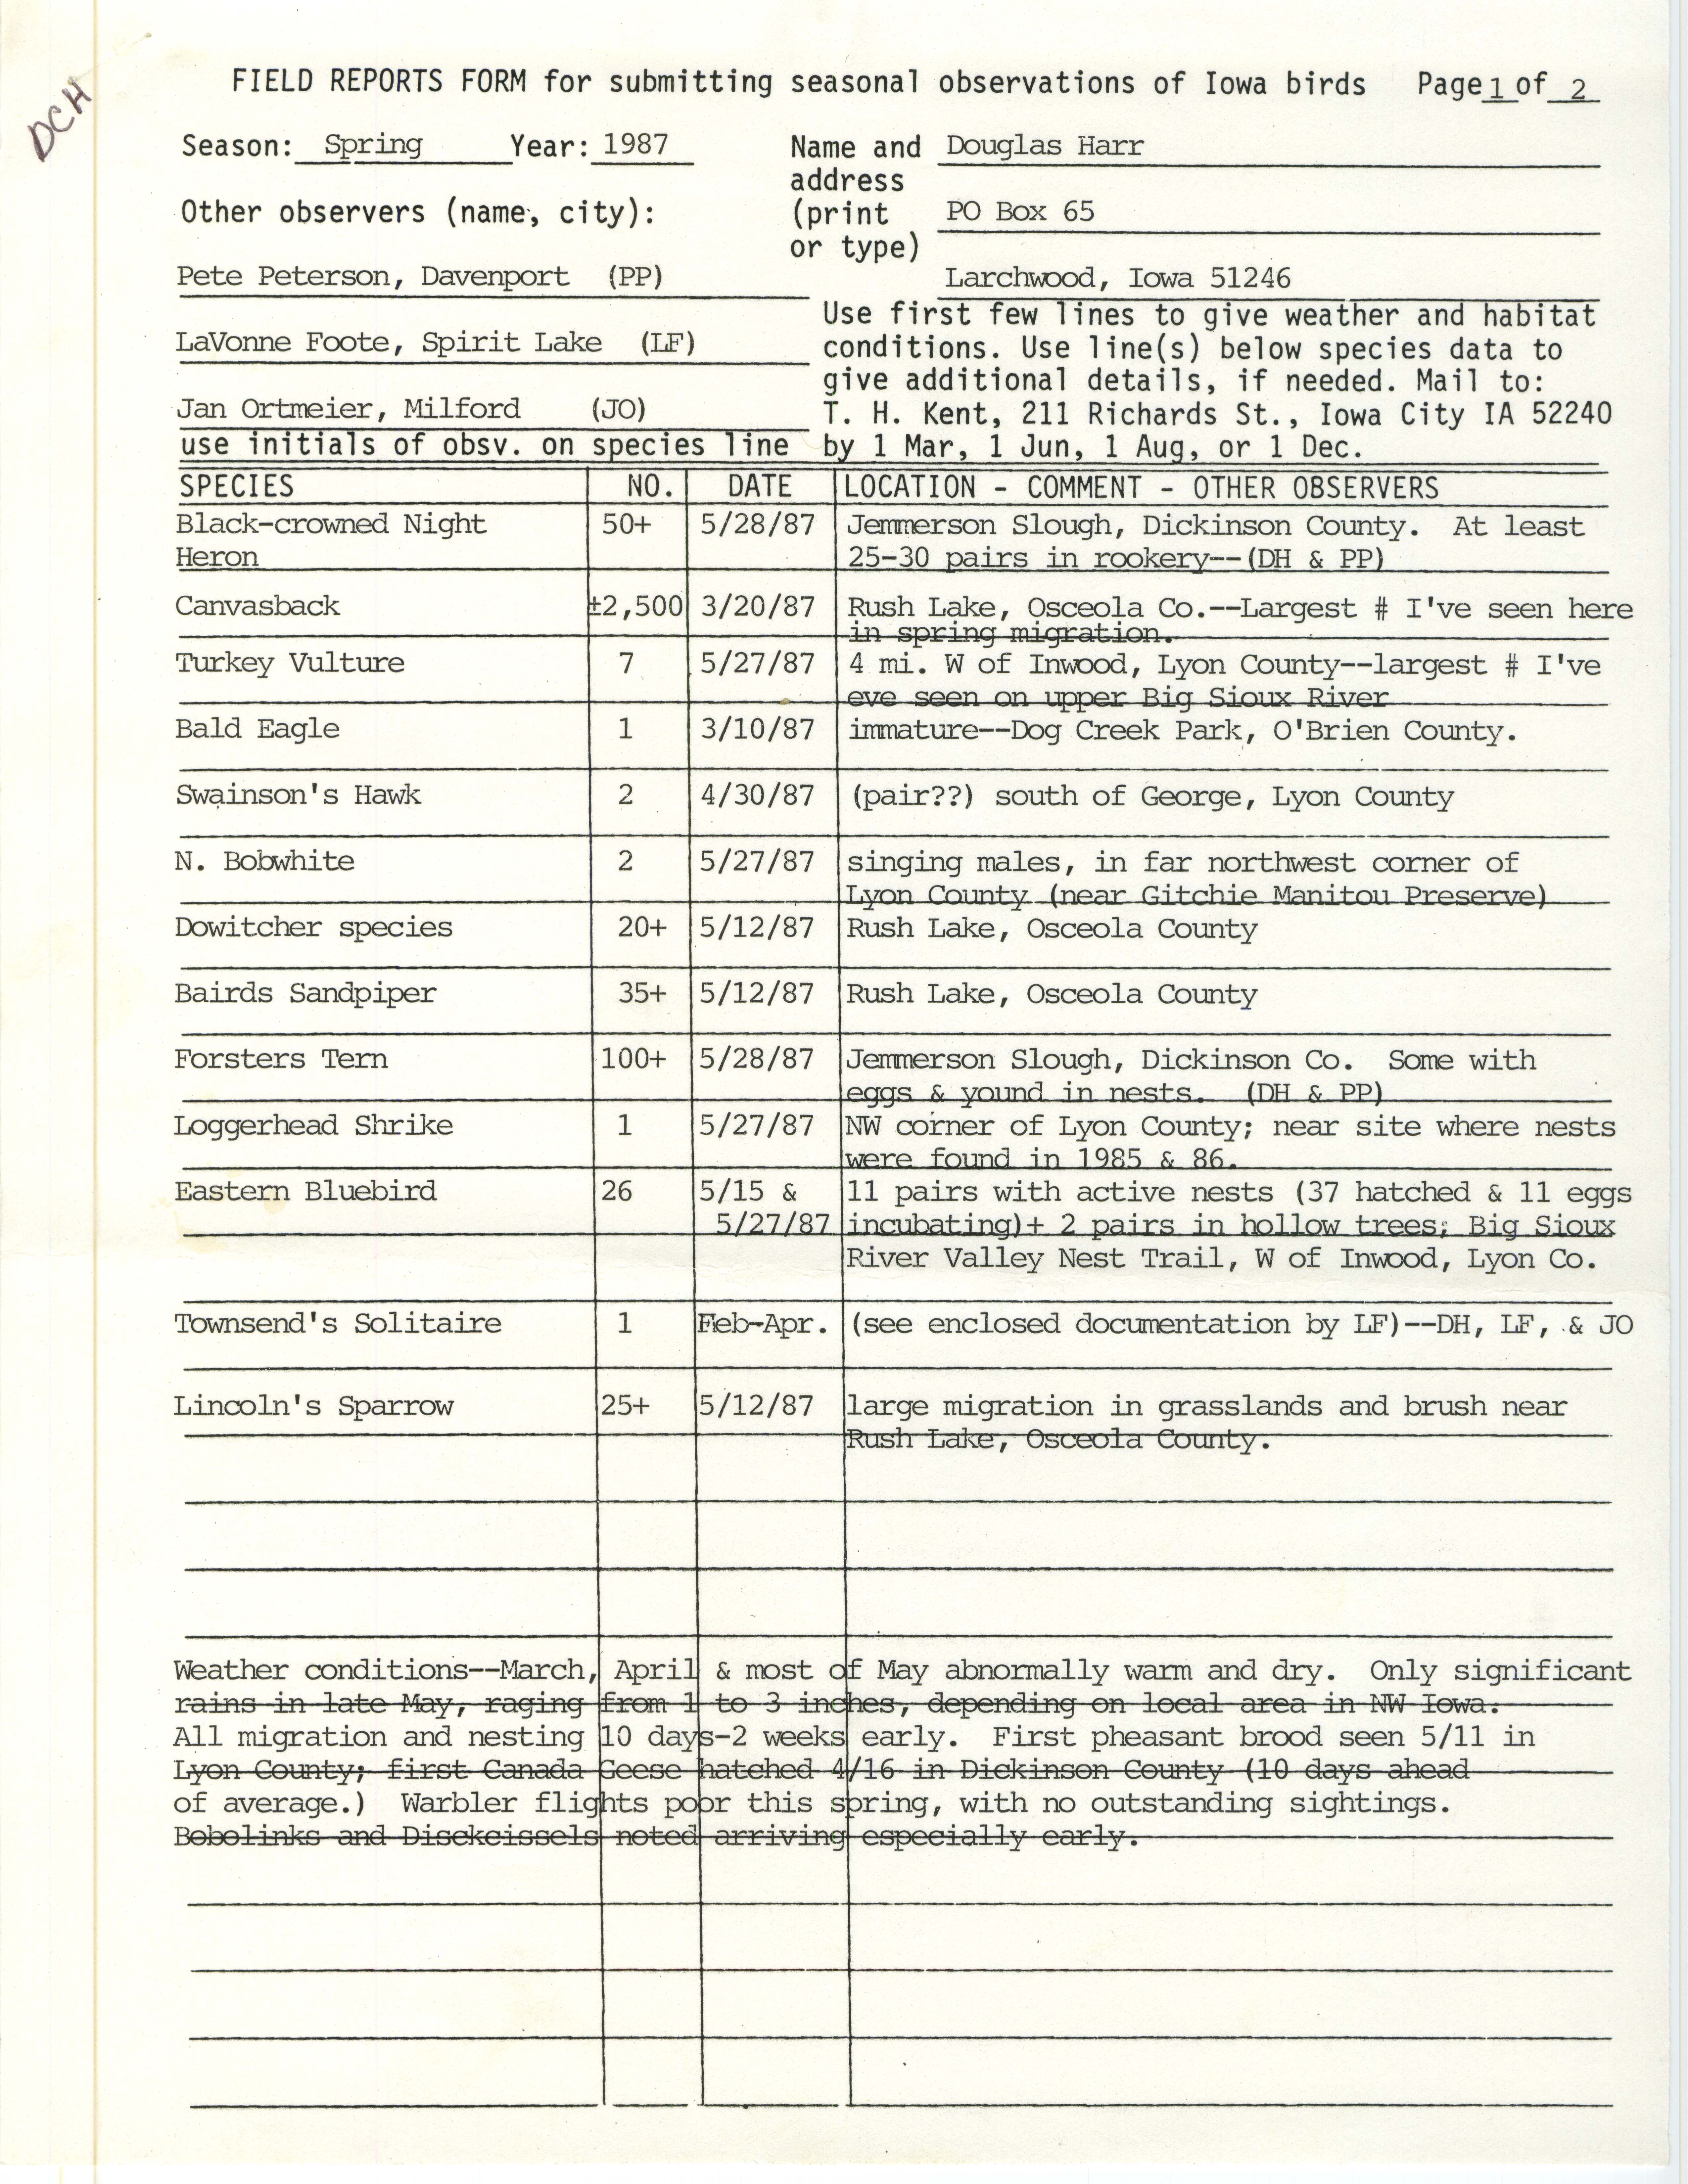 Field reports form for submitting seasonal observations of Iowa birds, Douglas C. Harr, spring 1987